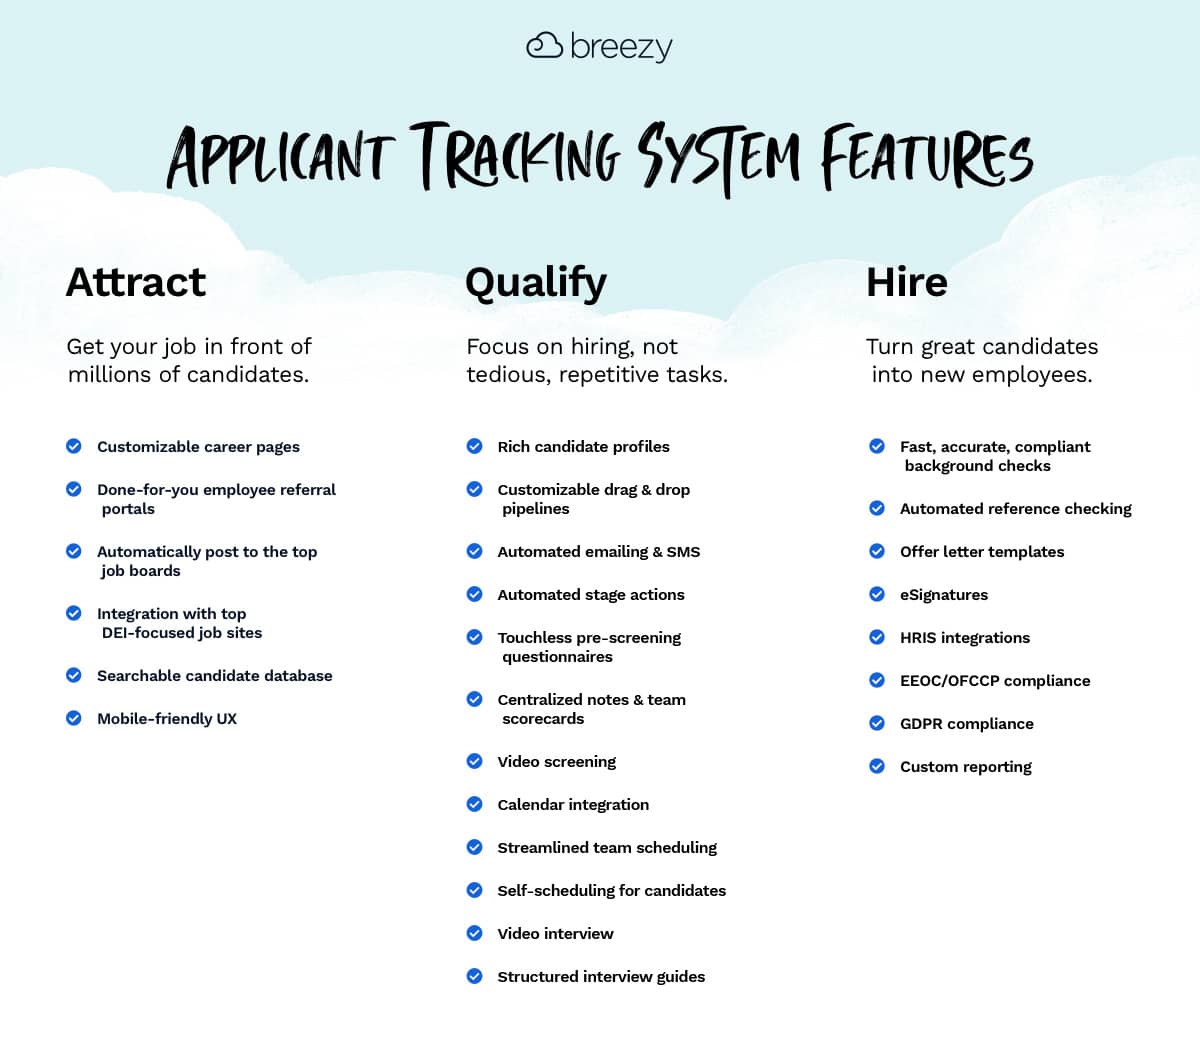 Applicant Tracking System Features for Small Businesses